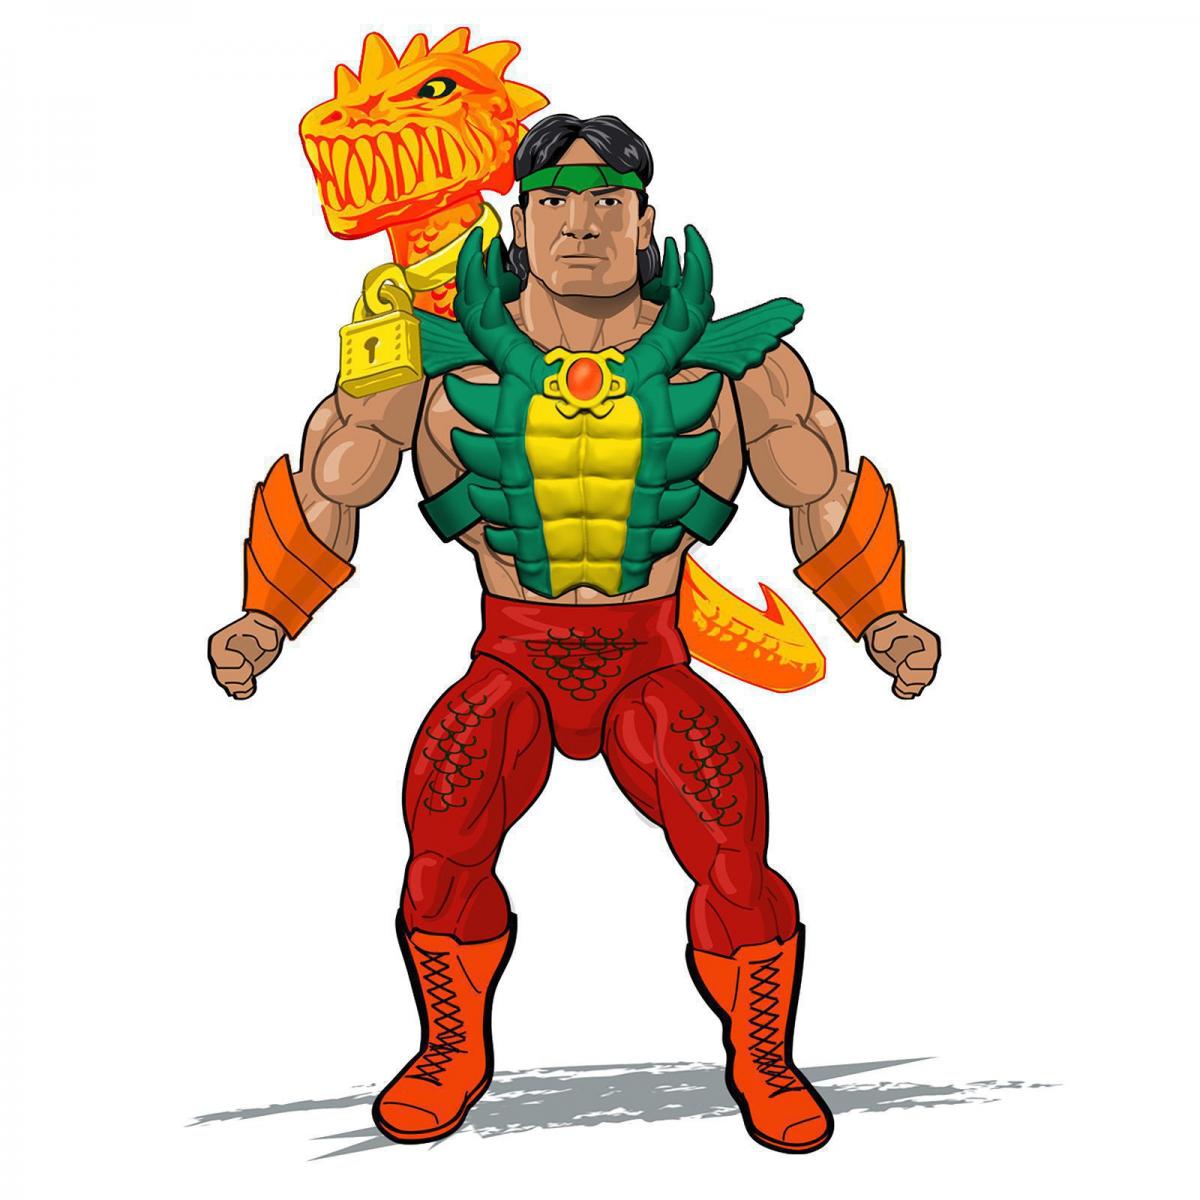 2021 Mattel Masters of the WWE Universe Series 5 Ricky "The Dragon" Steamboat [Exclusive]